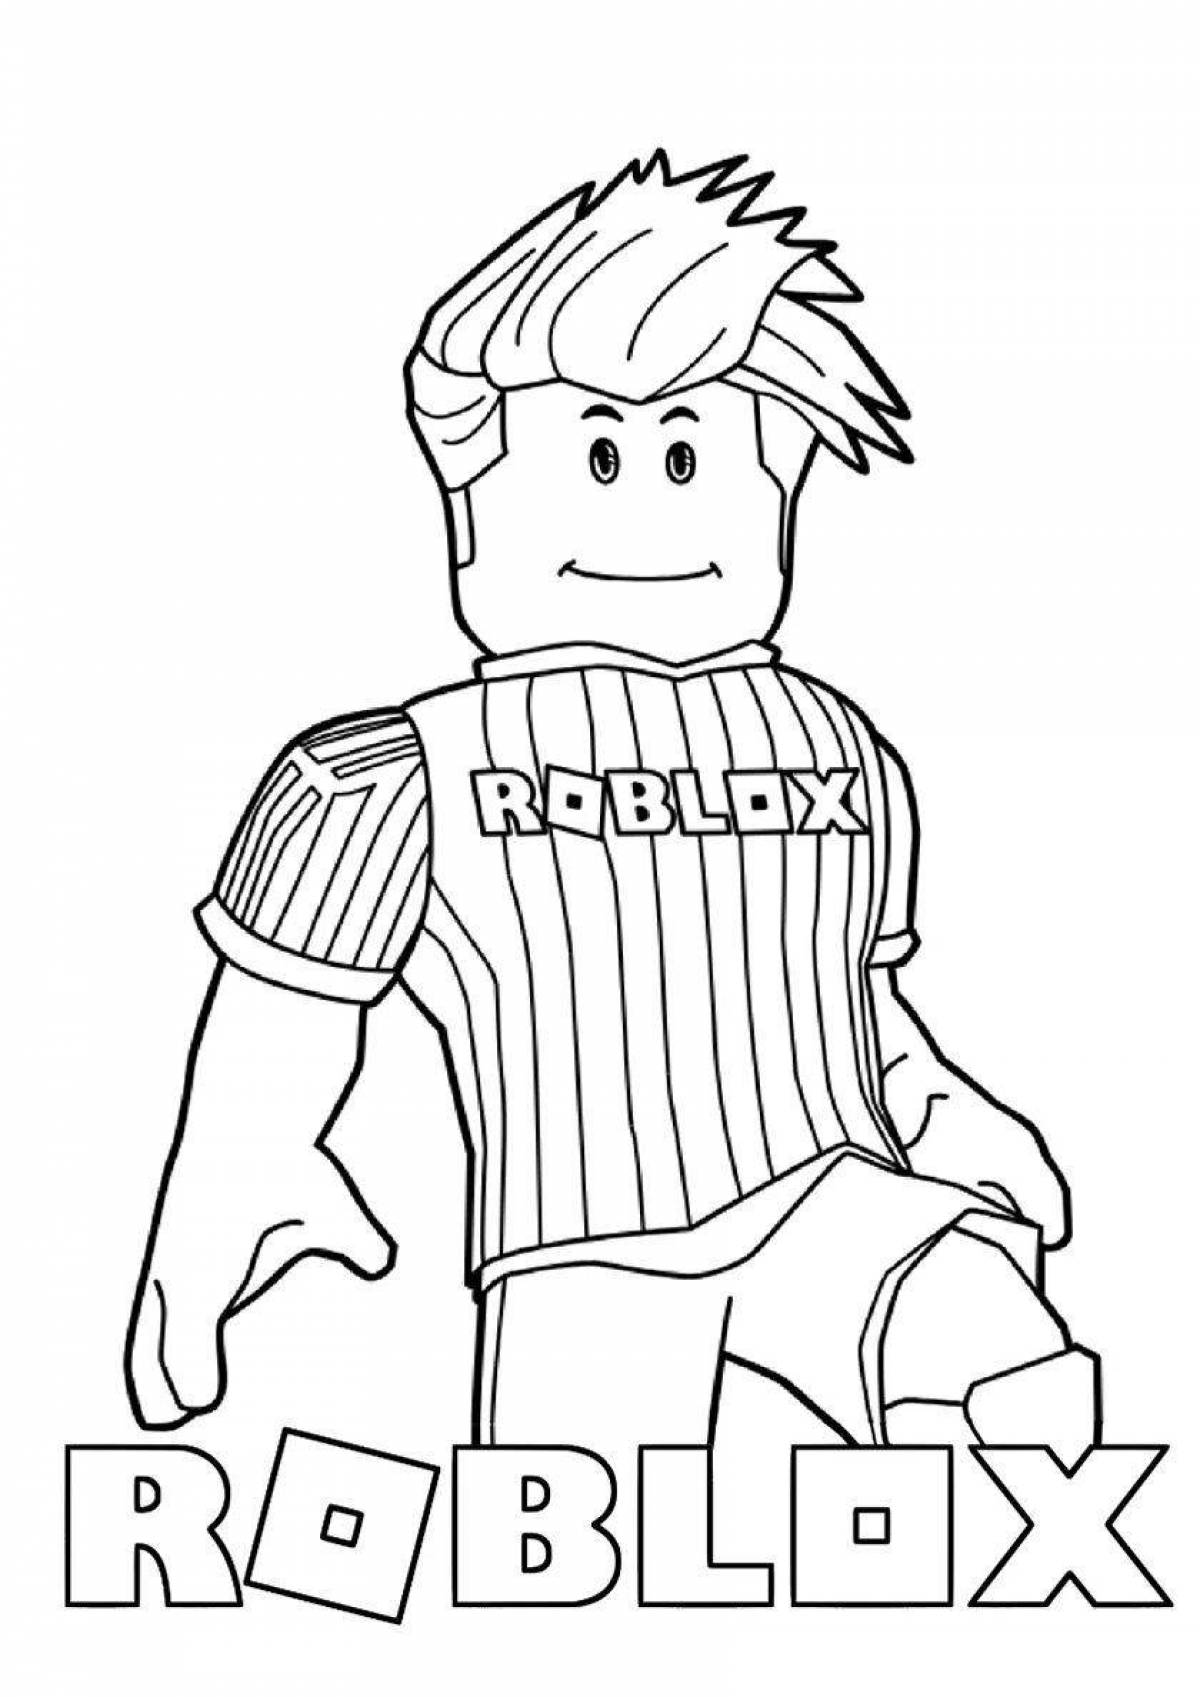 Roblox fairy tale characters coloring book